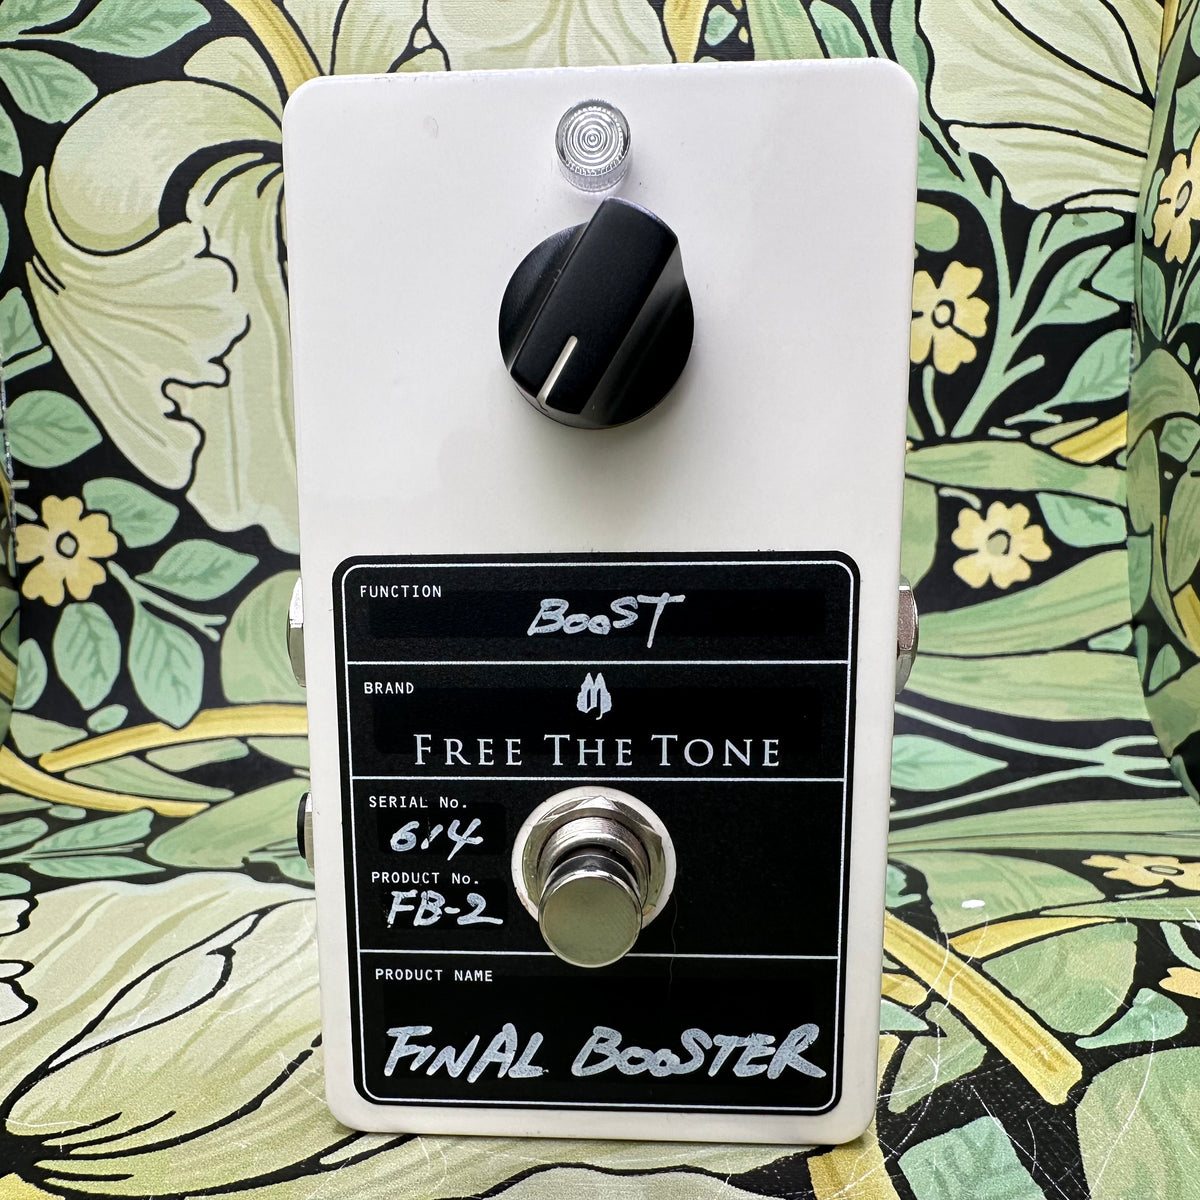 FREE THE TONE】FINAL BOOSTER - エフェクター